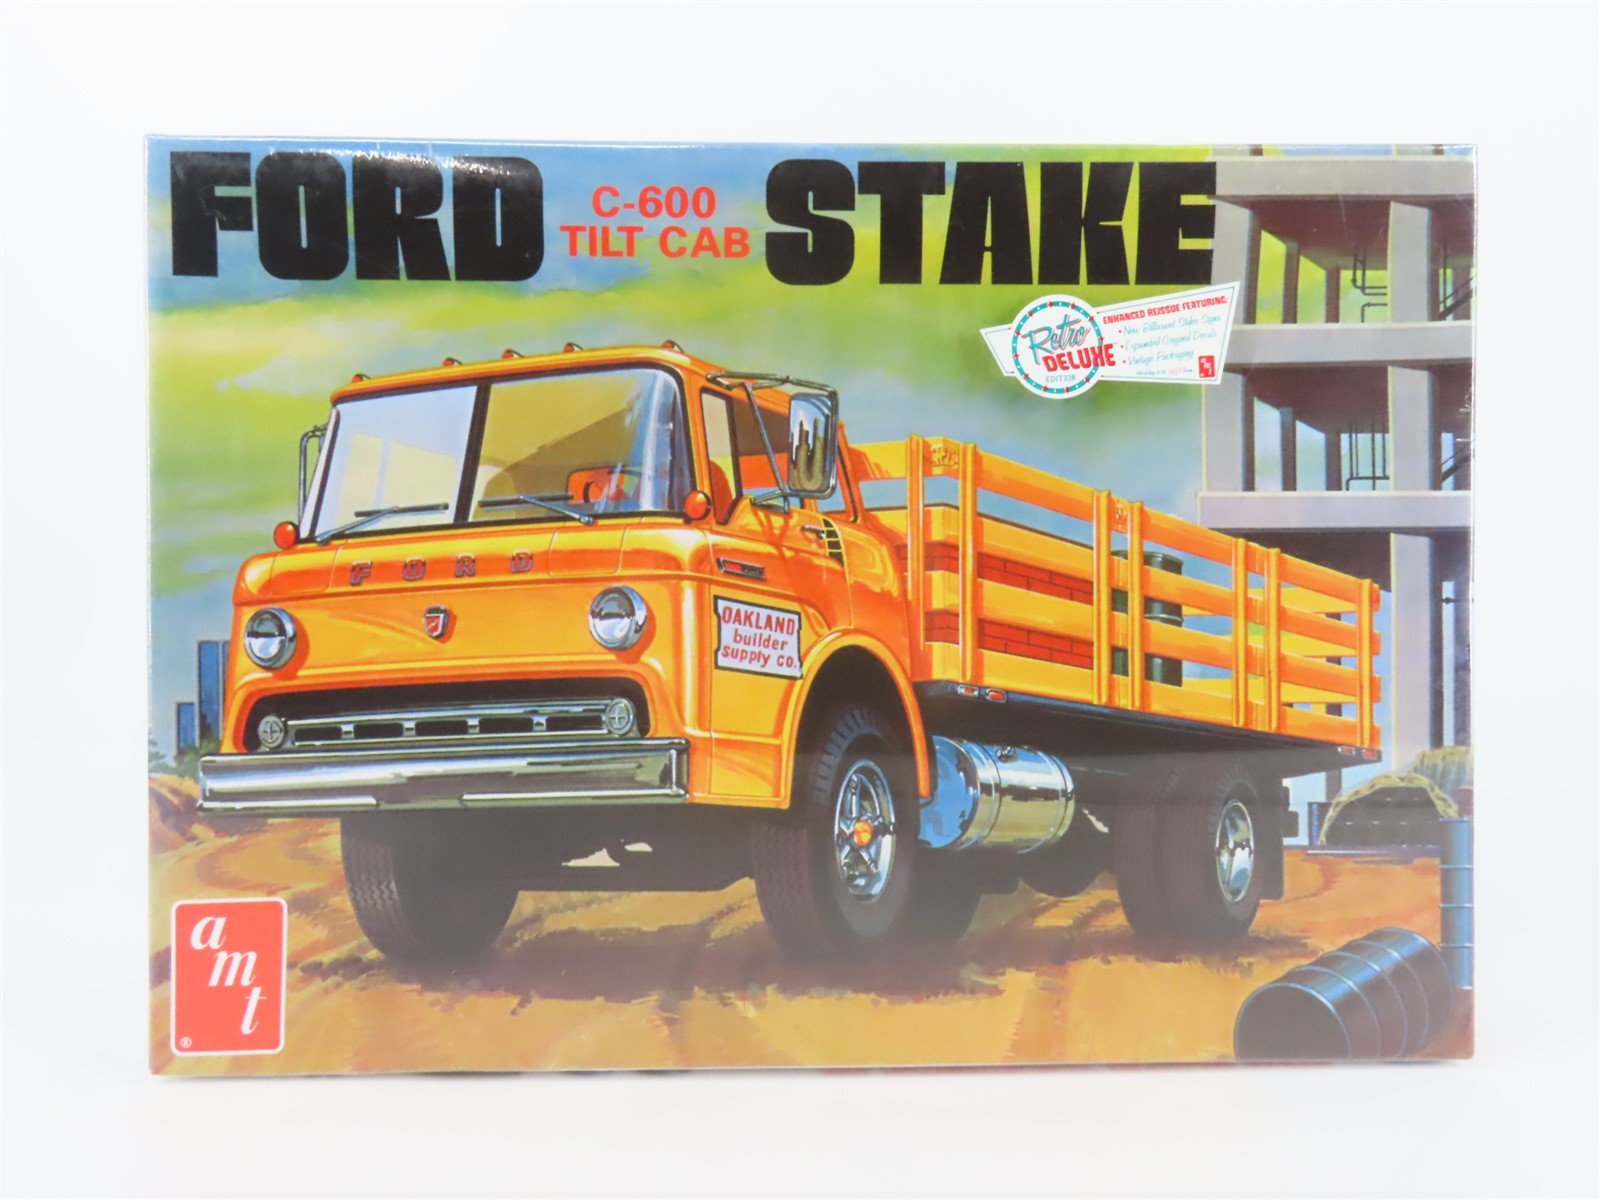 1:25 Scale AMT 650 Ford Stake C-600 Tilt Cab Truck Kit - Sealed